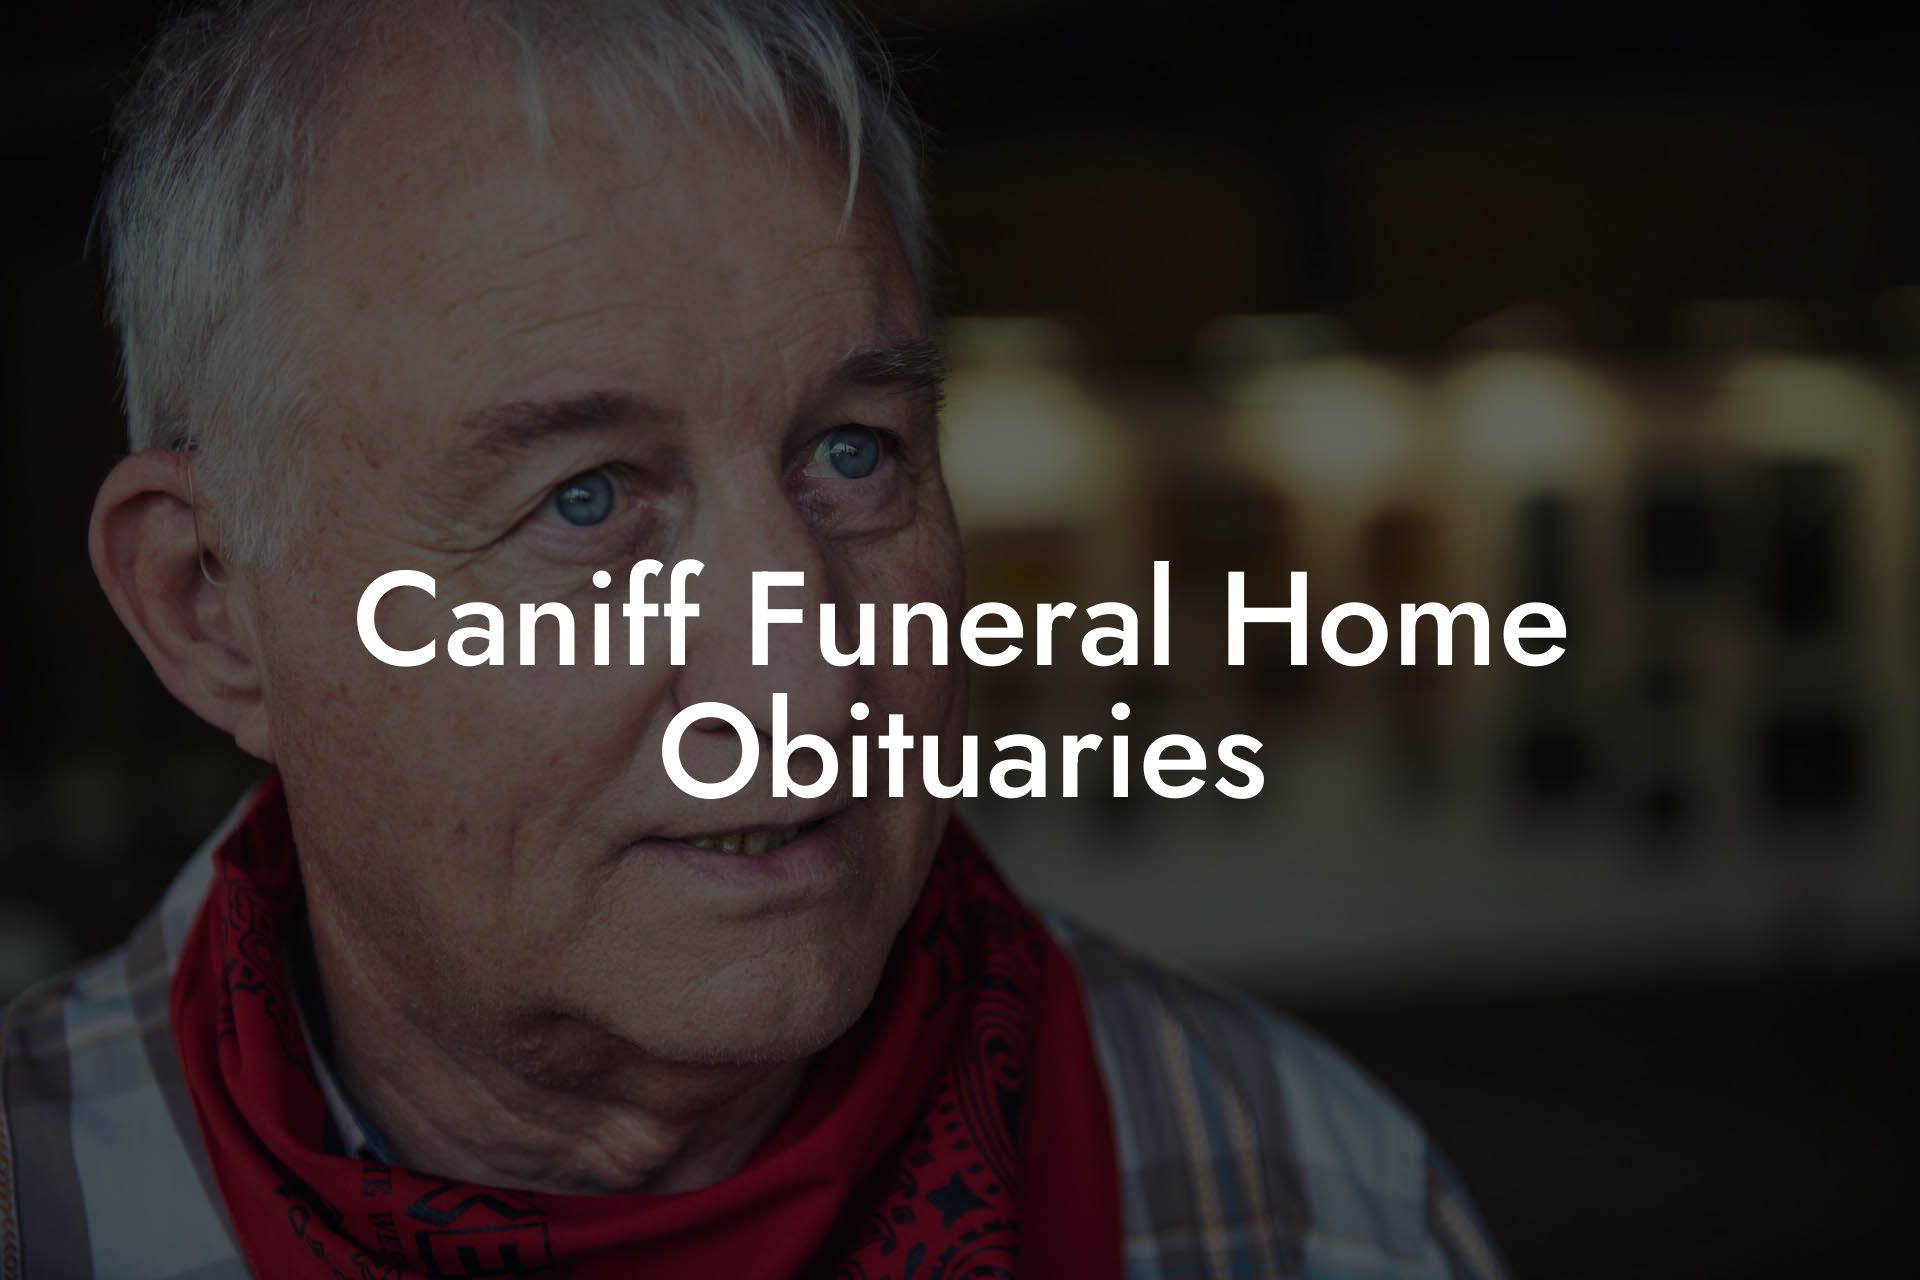 Caniff Funeral Home Obituaries